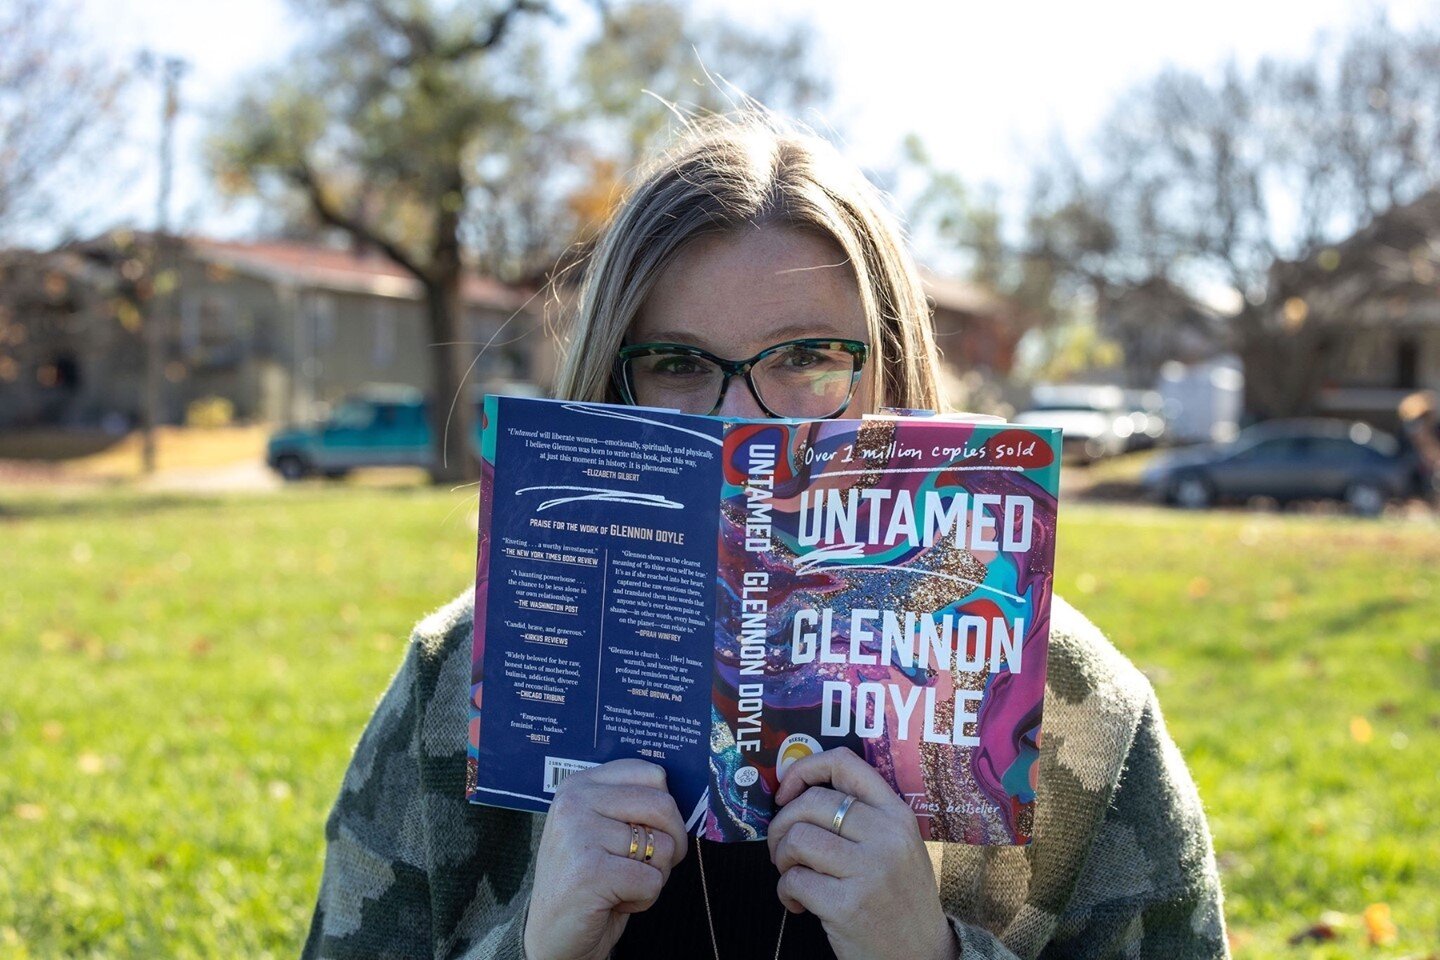 If you have not read Untamed yet, what are you waiting for?! ⁠
⁠
After finishing Glennon Doyle's other two books, I walked away from them feeling refreshed and inspired by her vulnerability and her honesty.  I genuinely enjoyed them, but never felt s